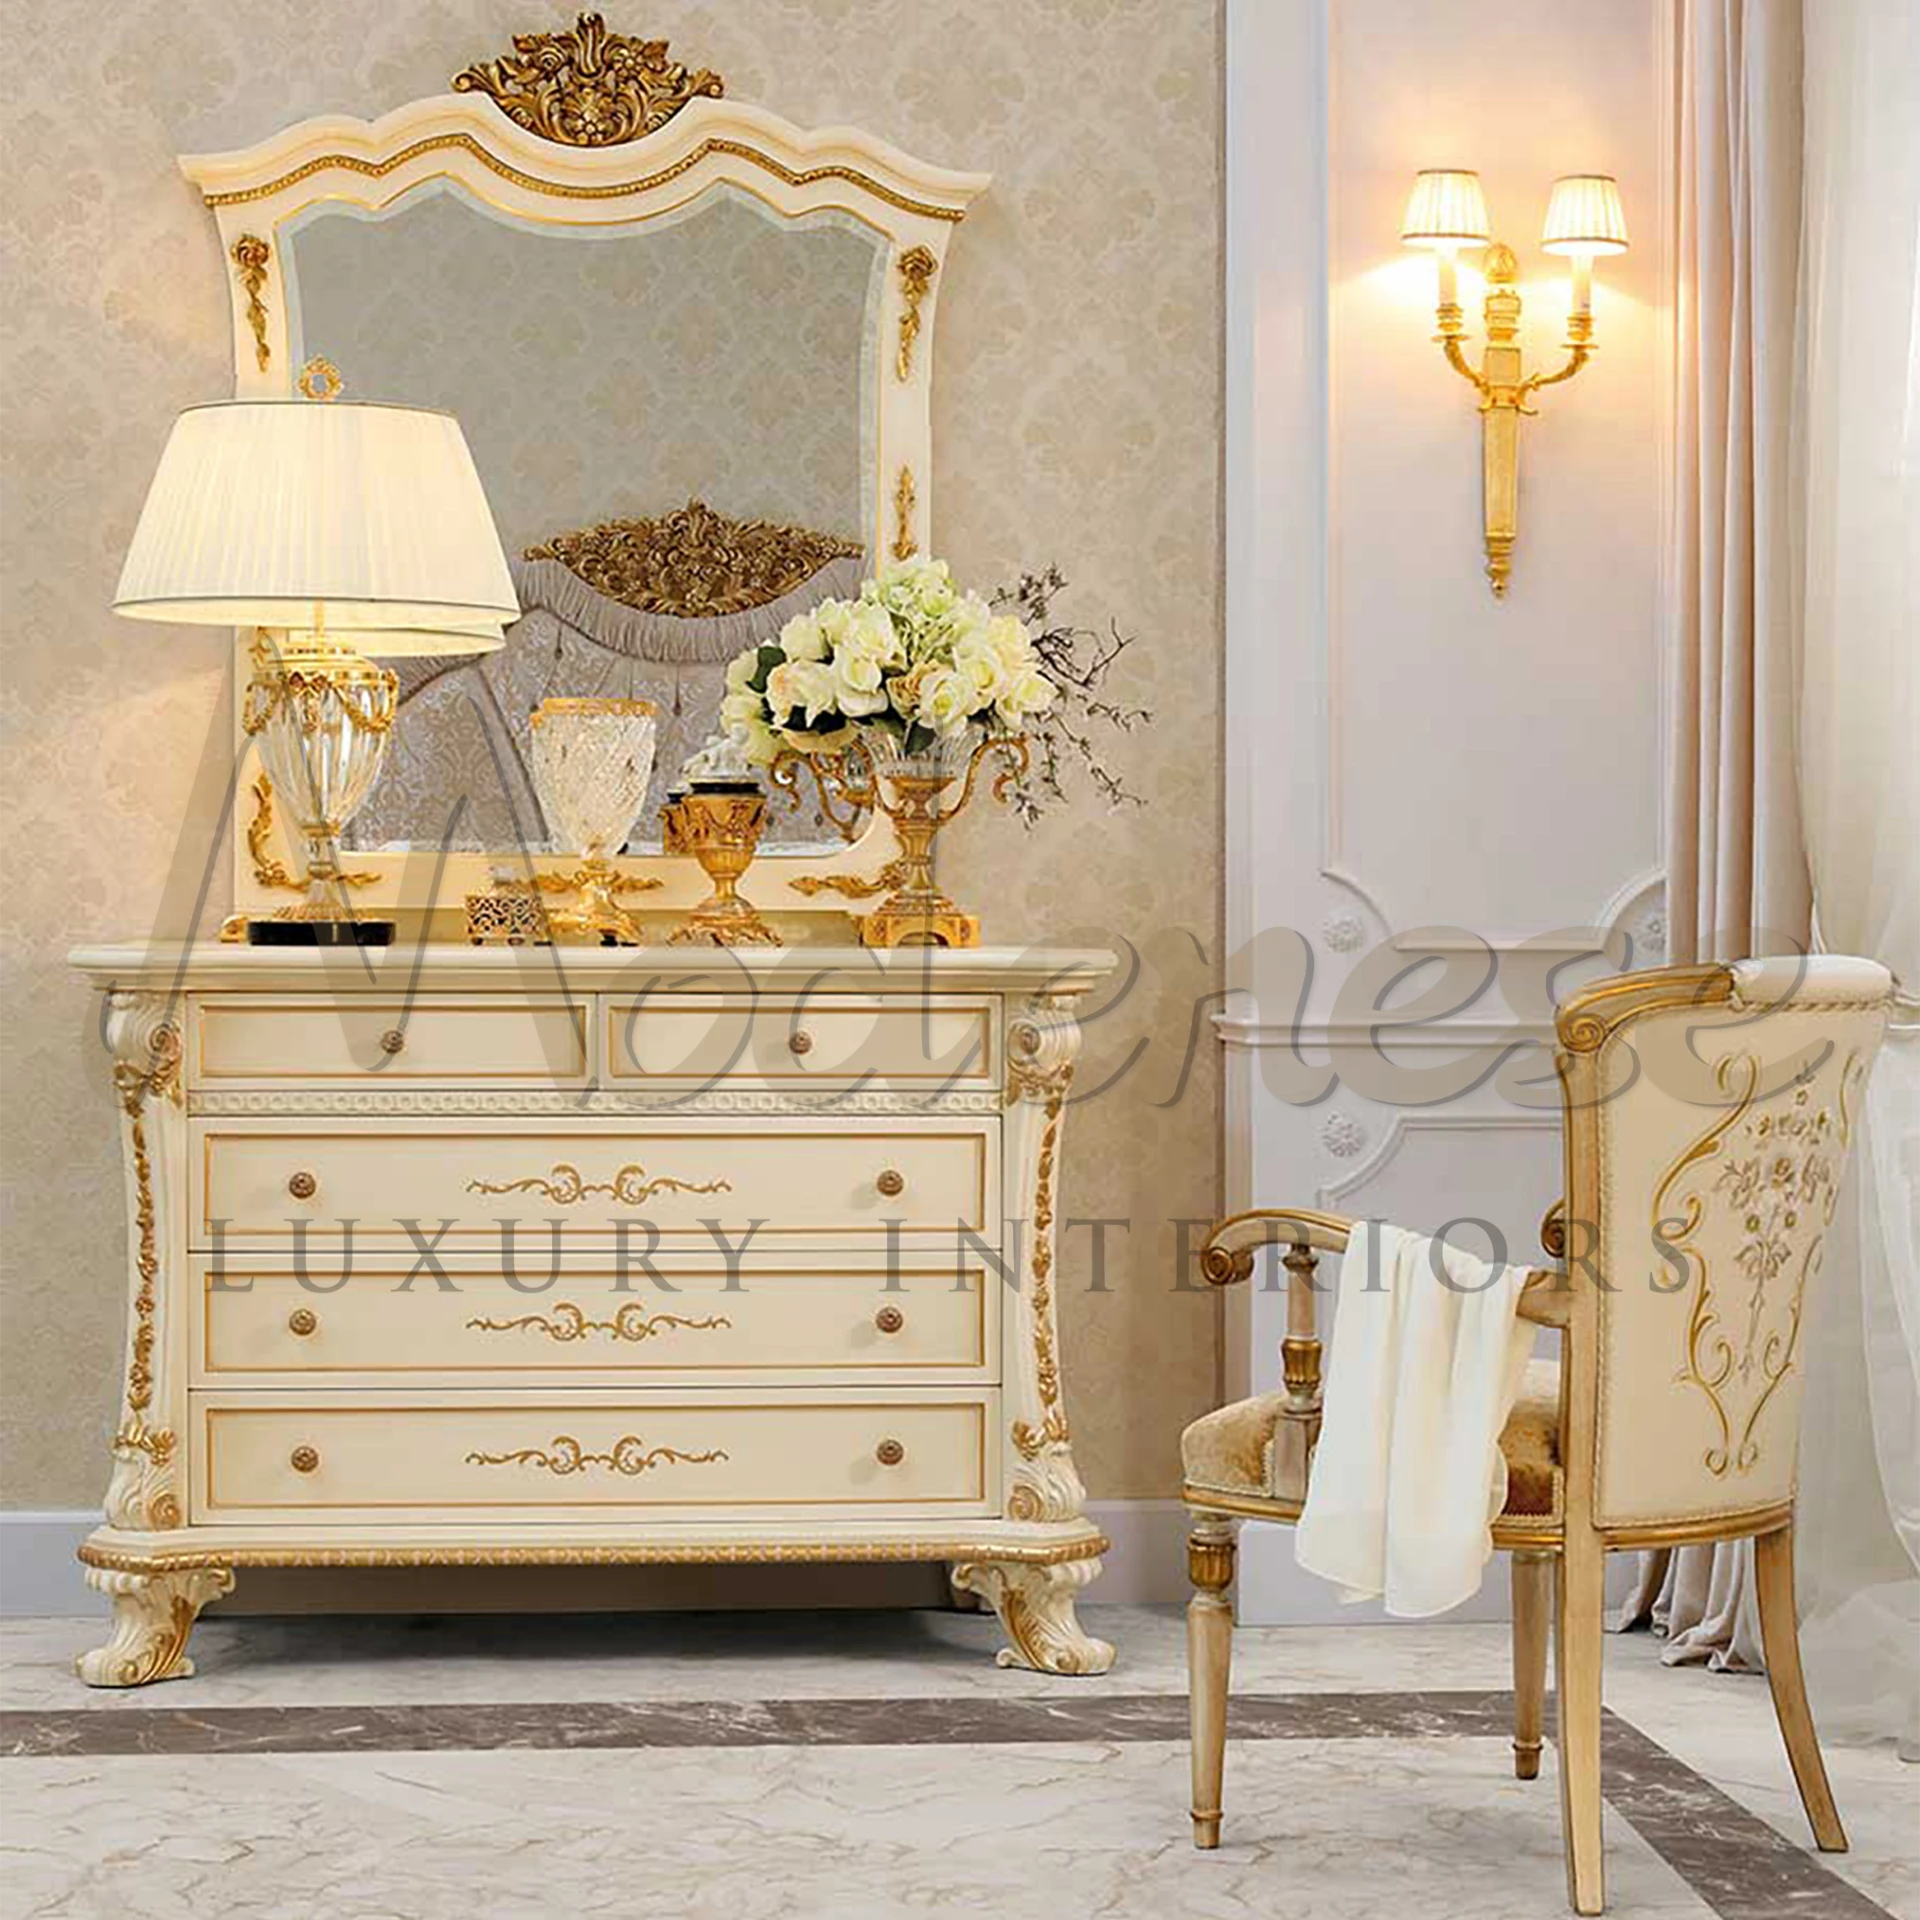 Classic cream and gold chest of drawers, showcasing a rich design with a tabletop adorned with a stylish lamp and elegant floral decor.